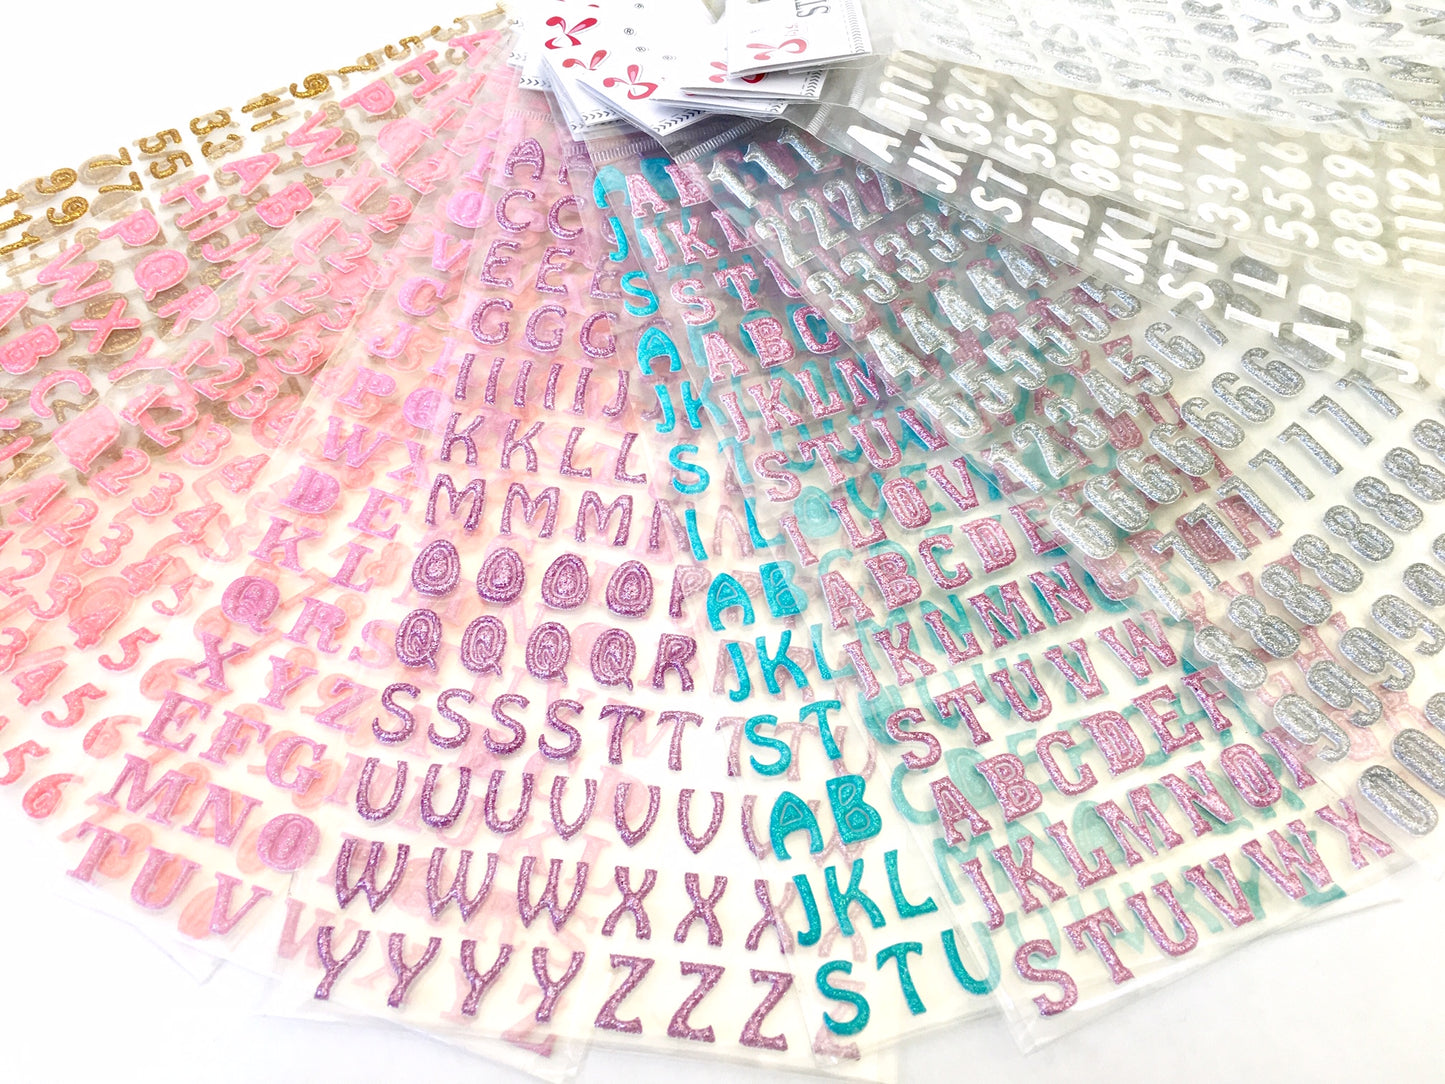 X 10134 GLITTER ALPHABET NUMBER PUFFY STICKERS-DISCONTINUED